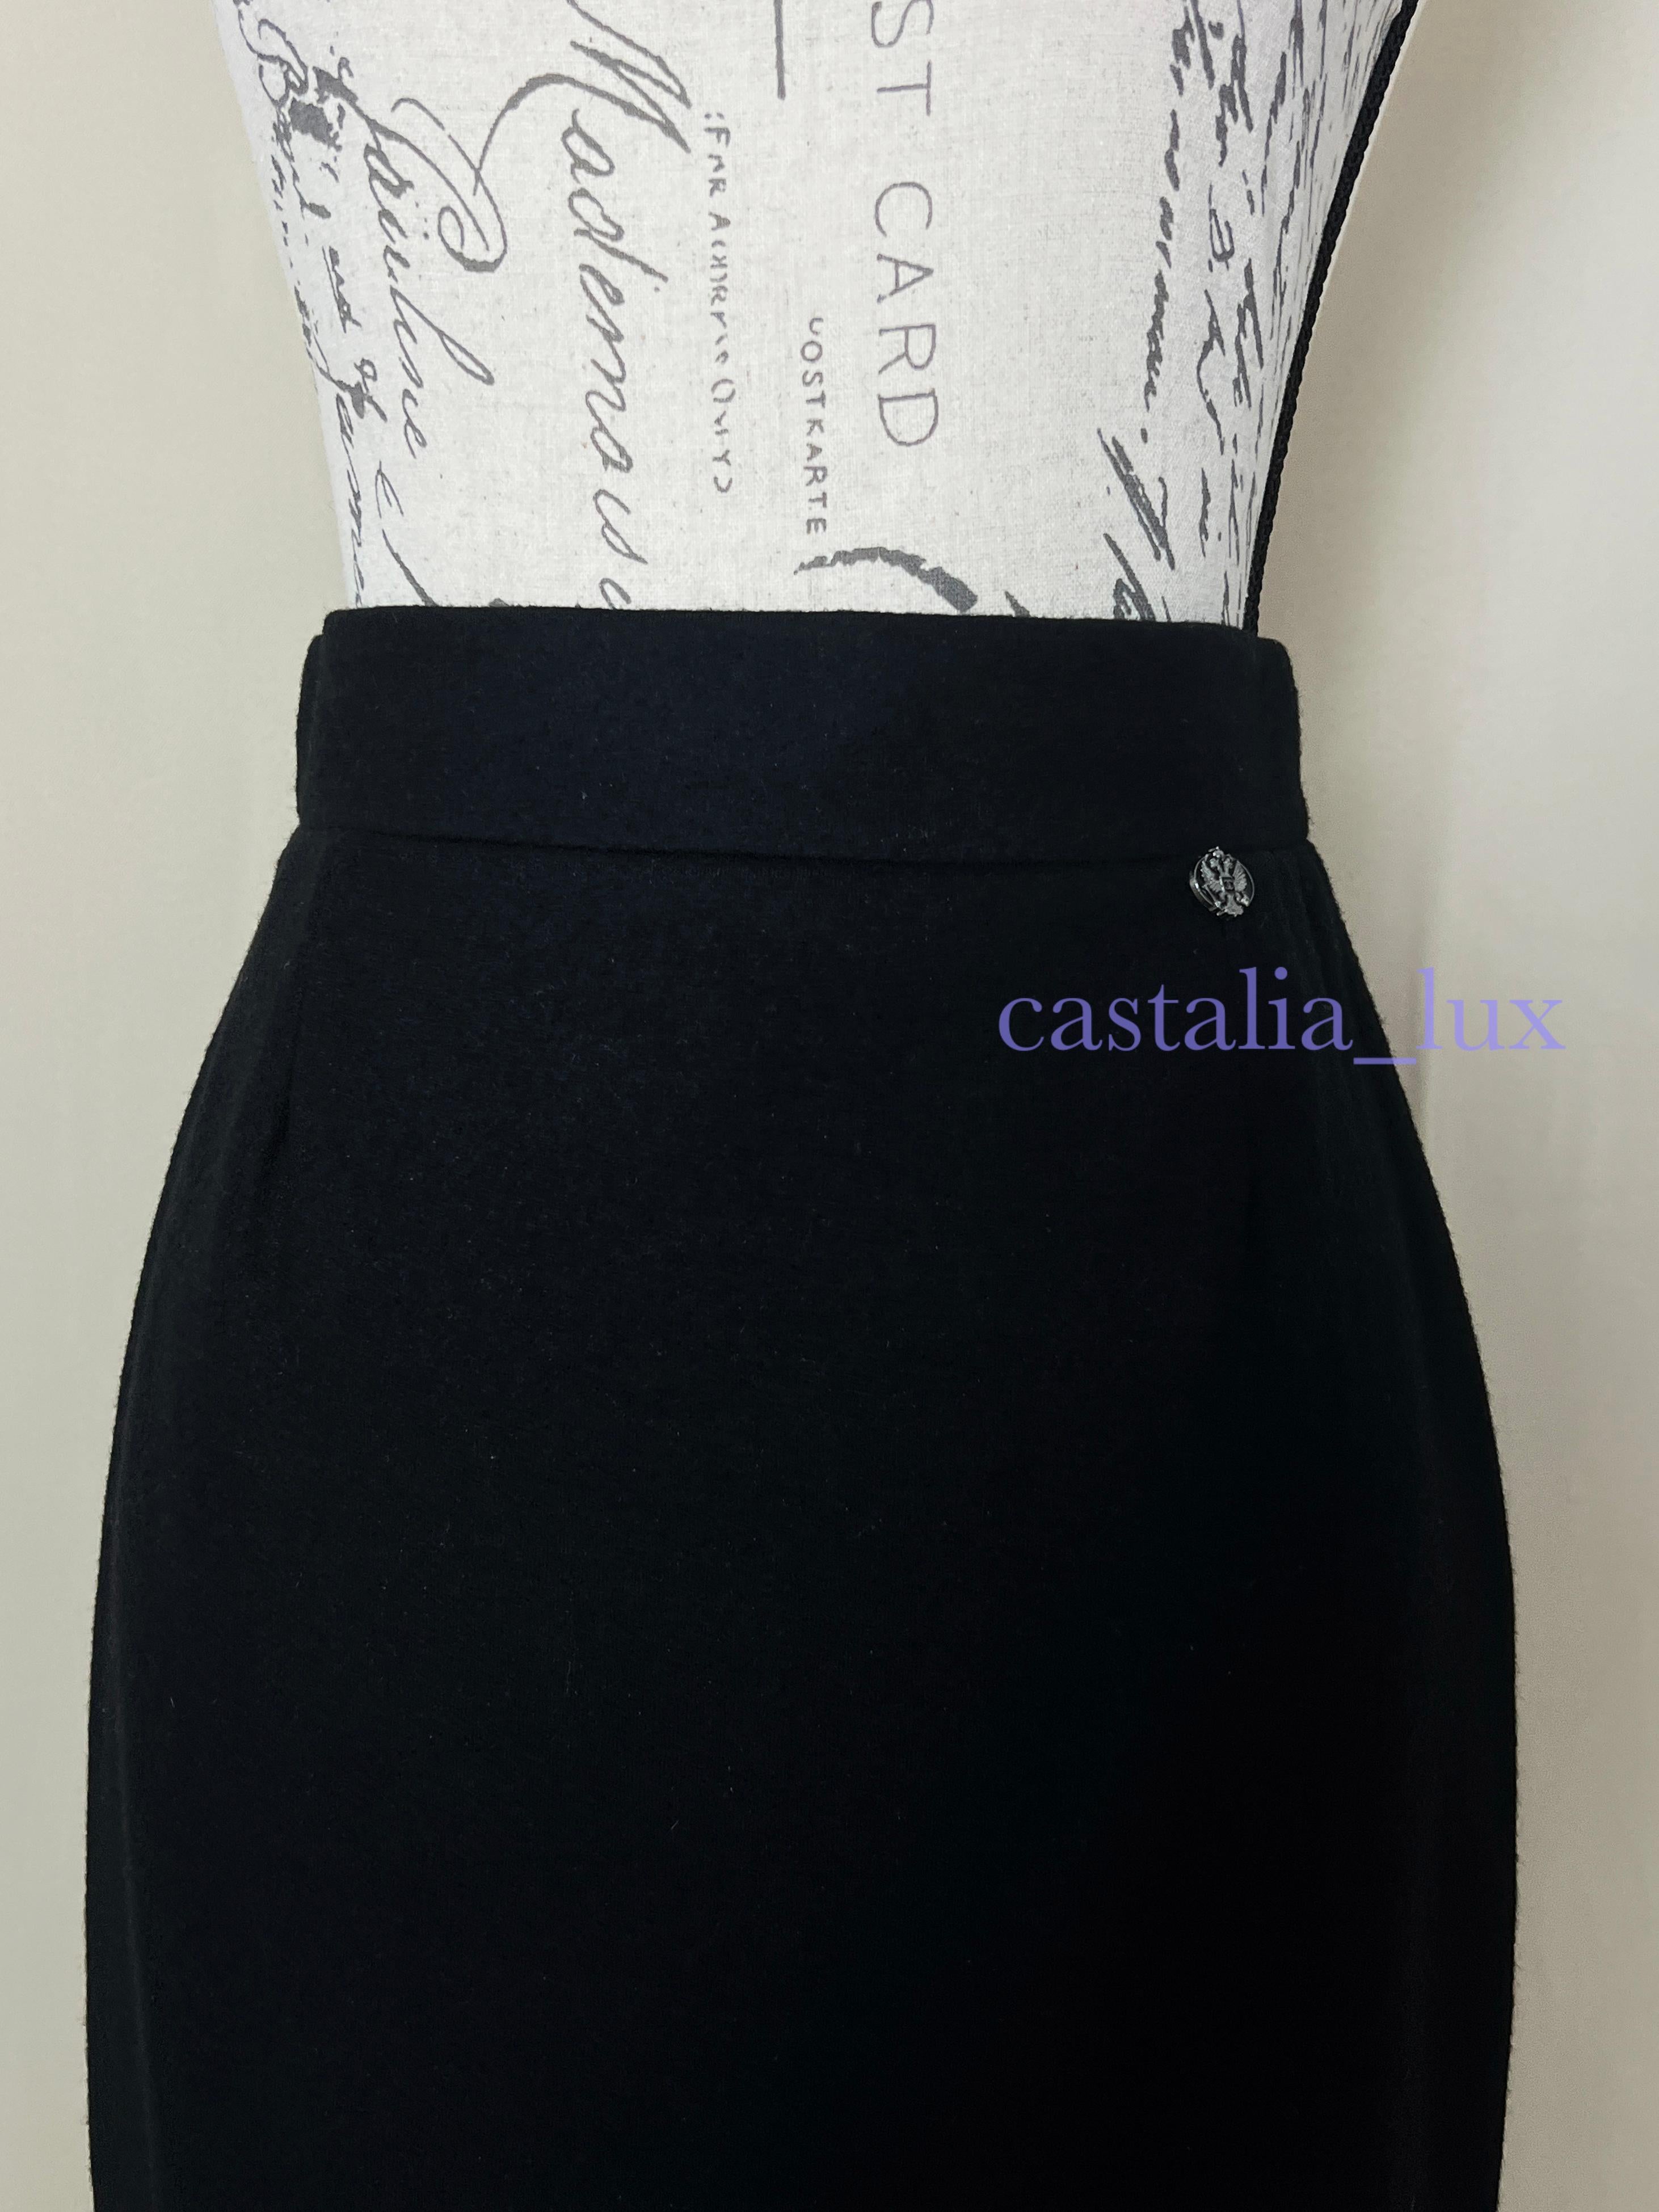 Chanel New Eagle Charm Black Pencil Skirt For Sale 4